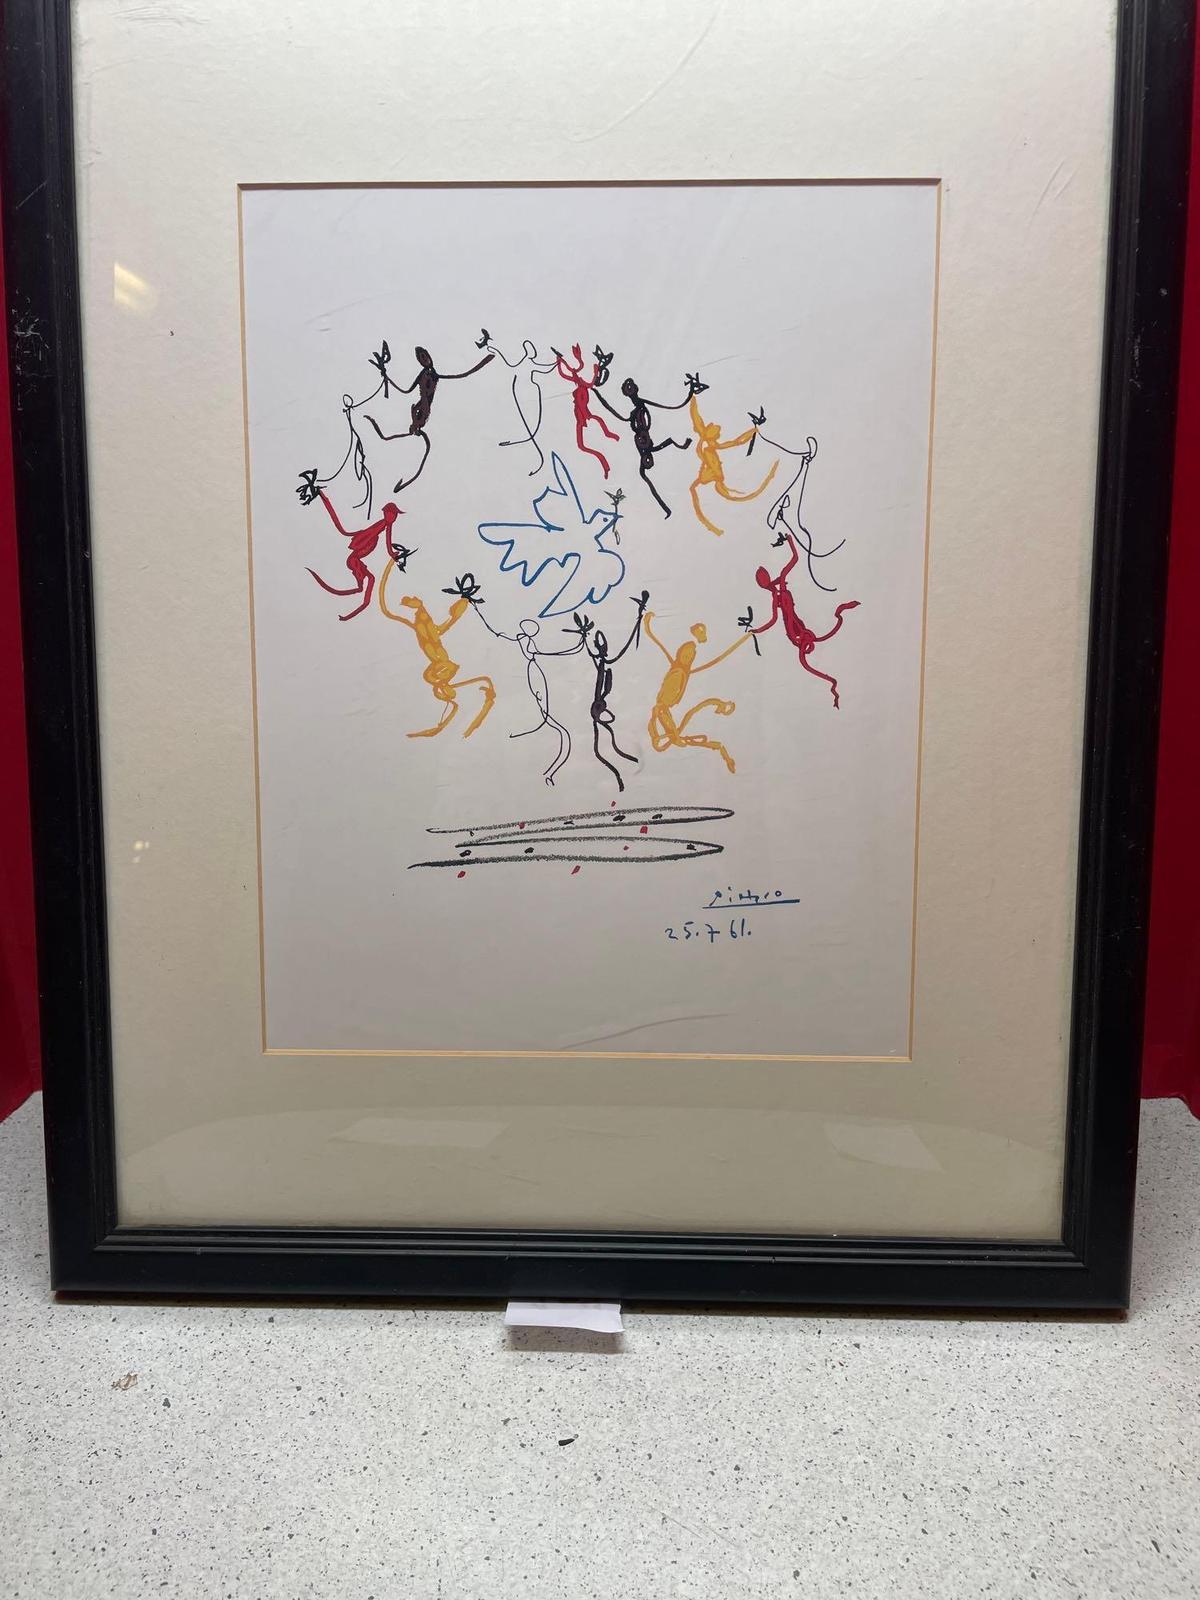 Framed Picasso dated 1961